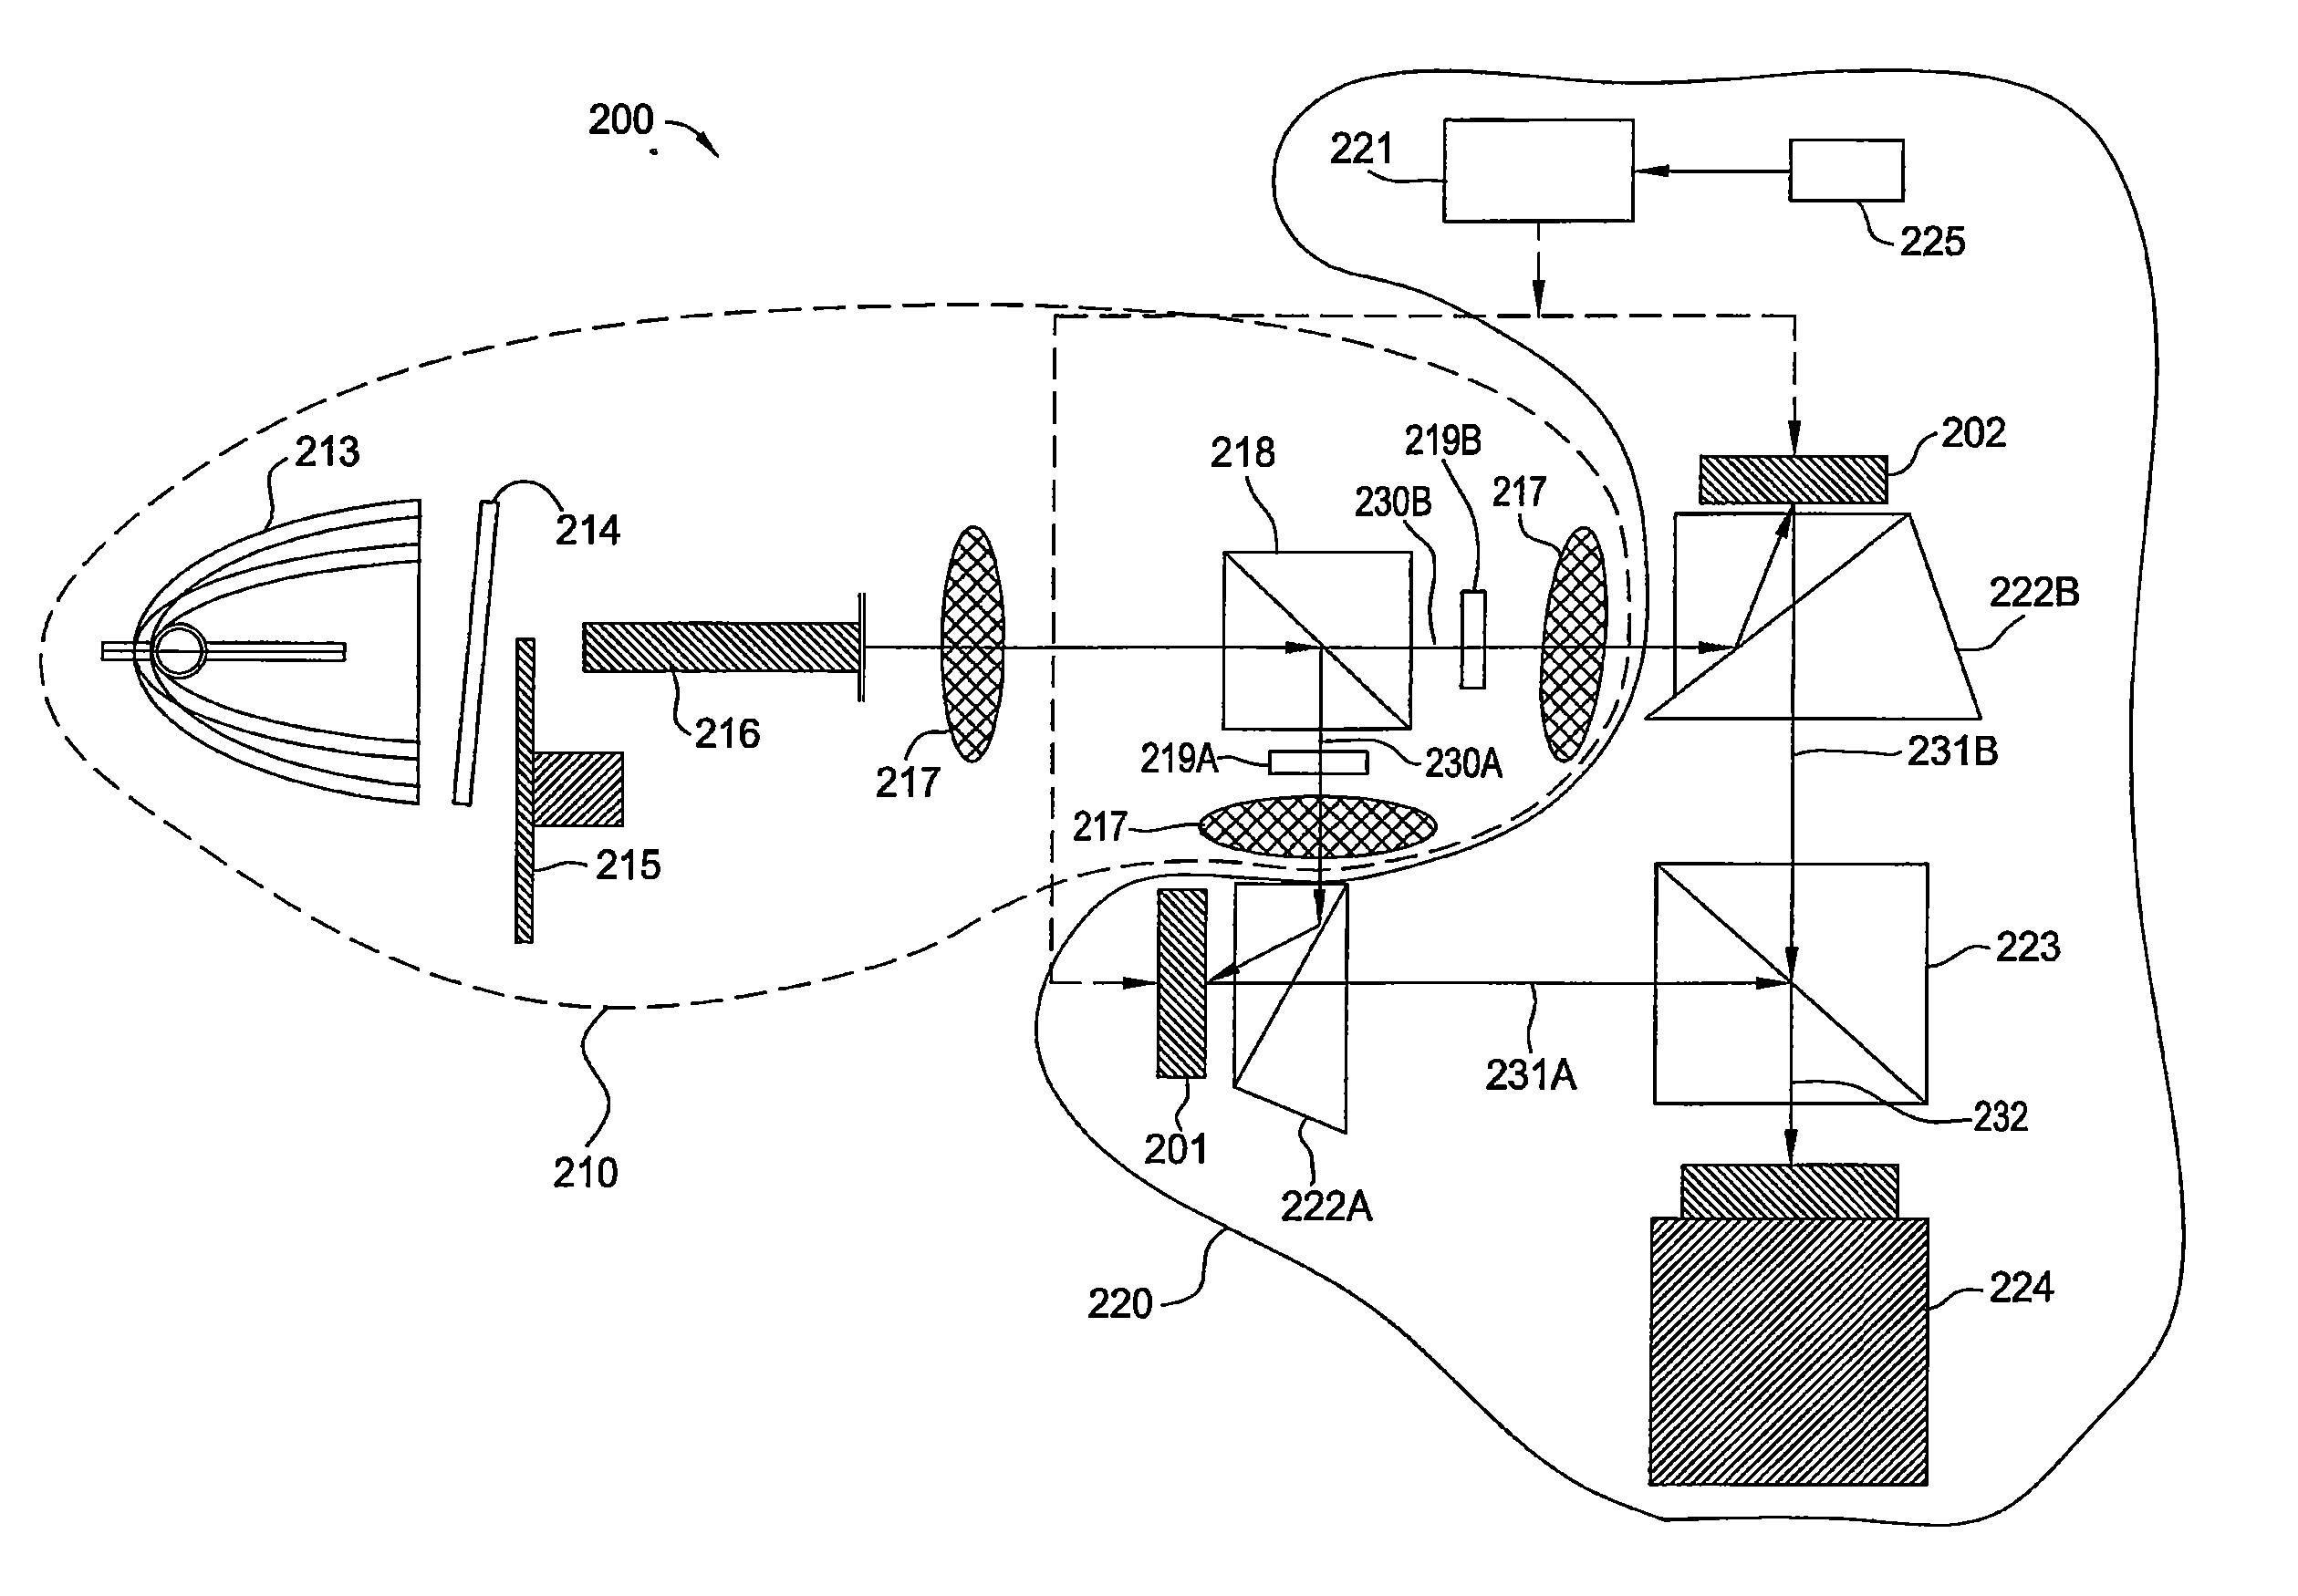 Spatially offset multi-imager-panel architecture for projecting an image